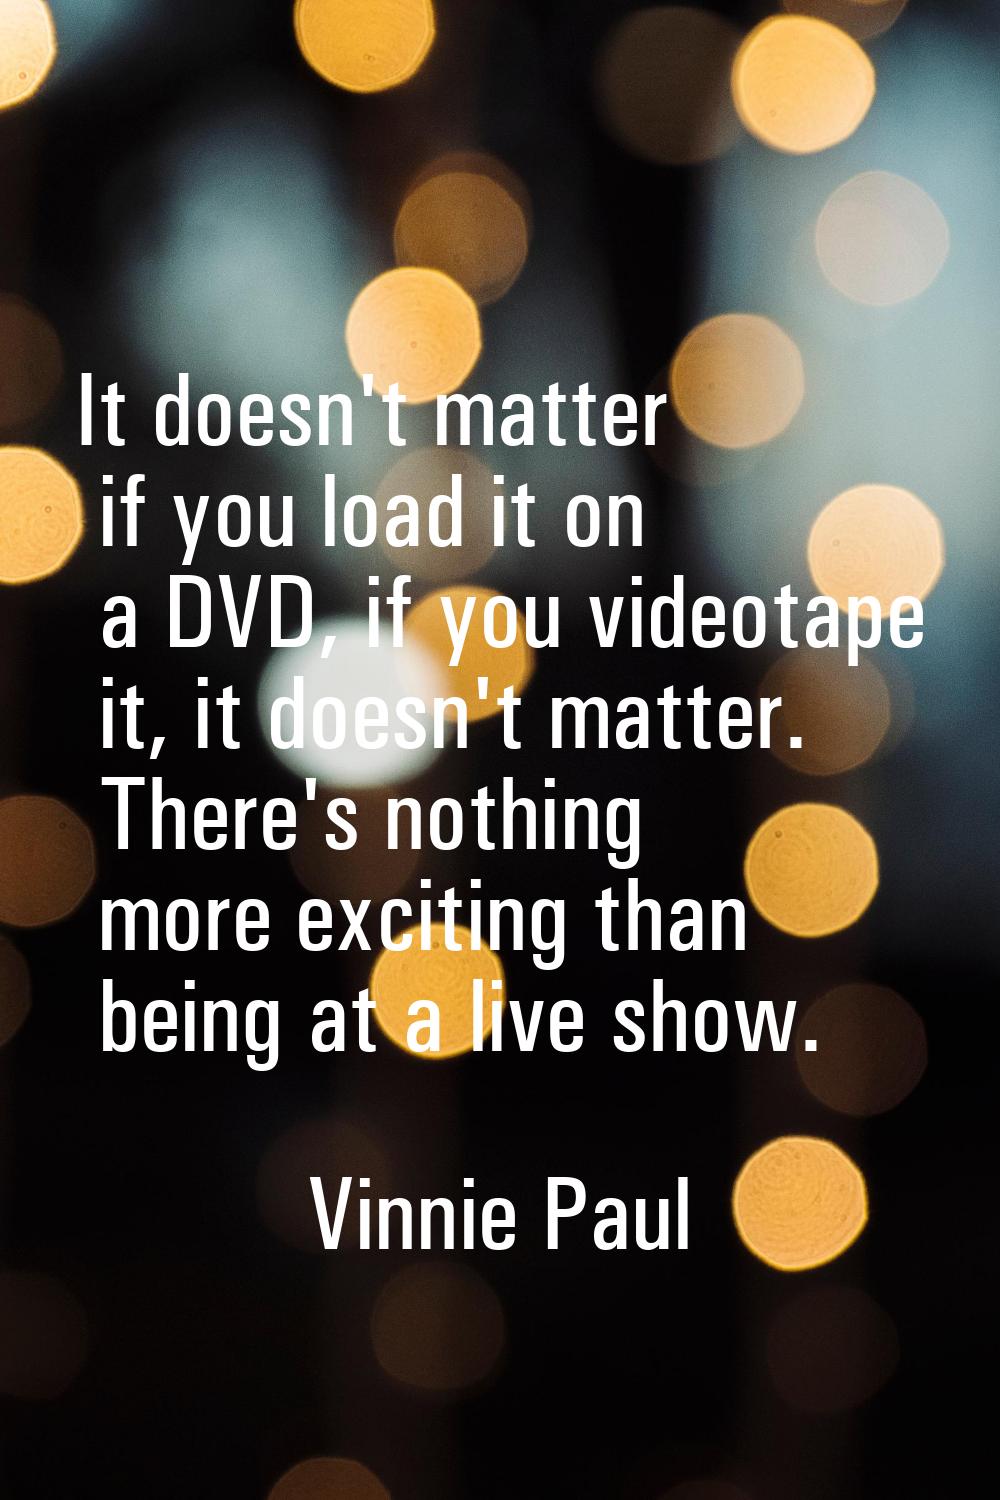 It doesn't matter if you load it on a DVD, if you videotape it, it doesn't matter. There's nothing 